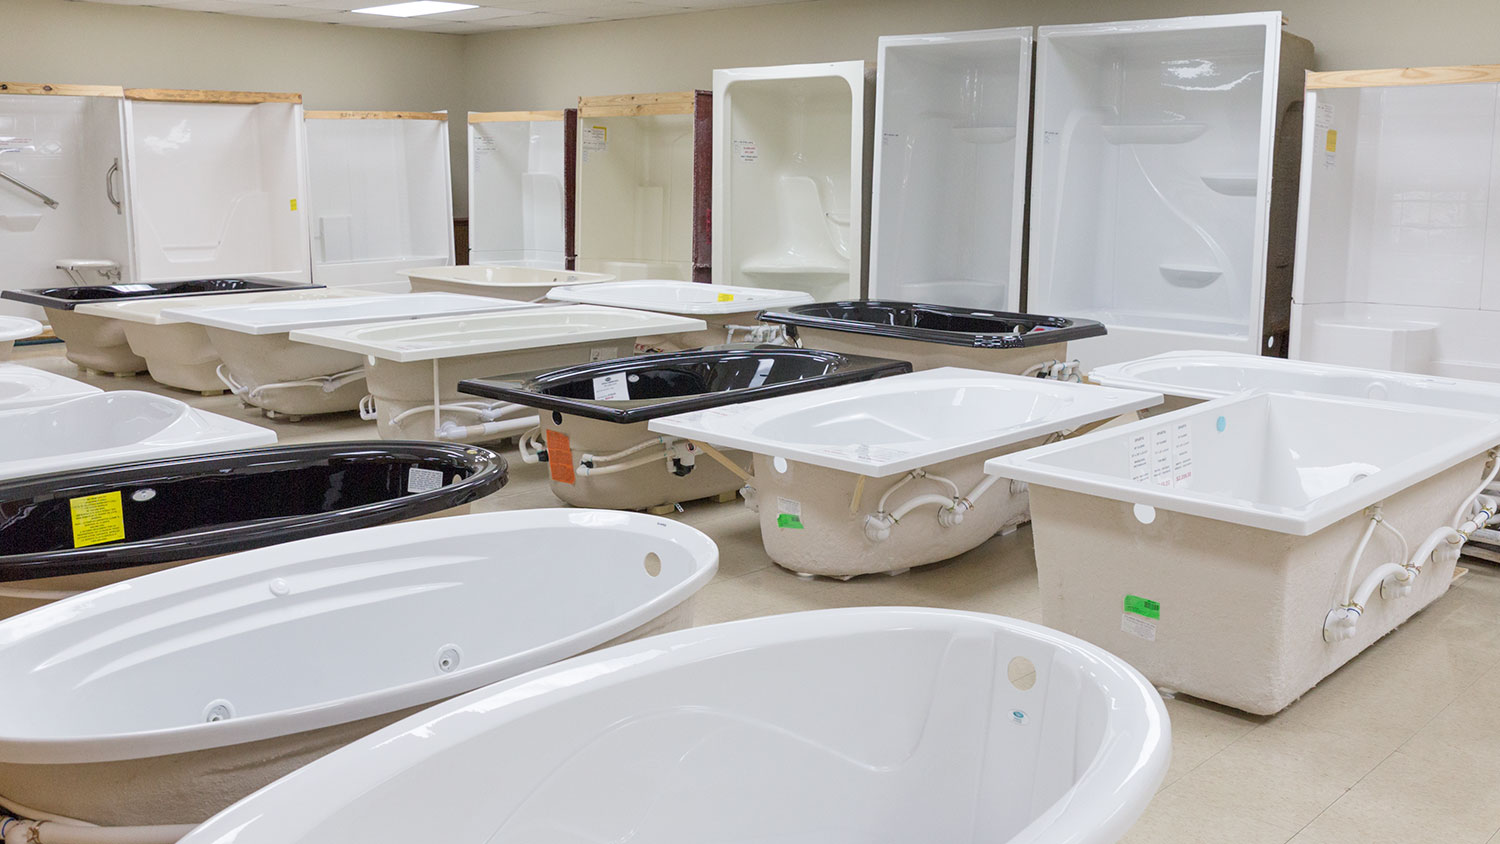 More Drop-in Jetted & Soaking Tubs...